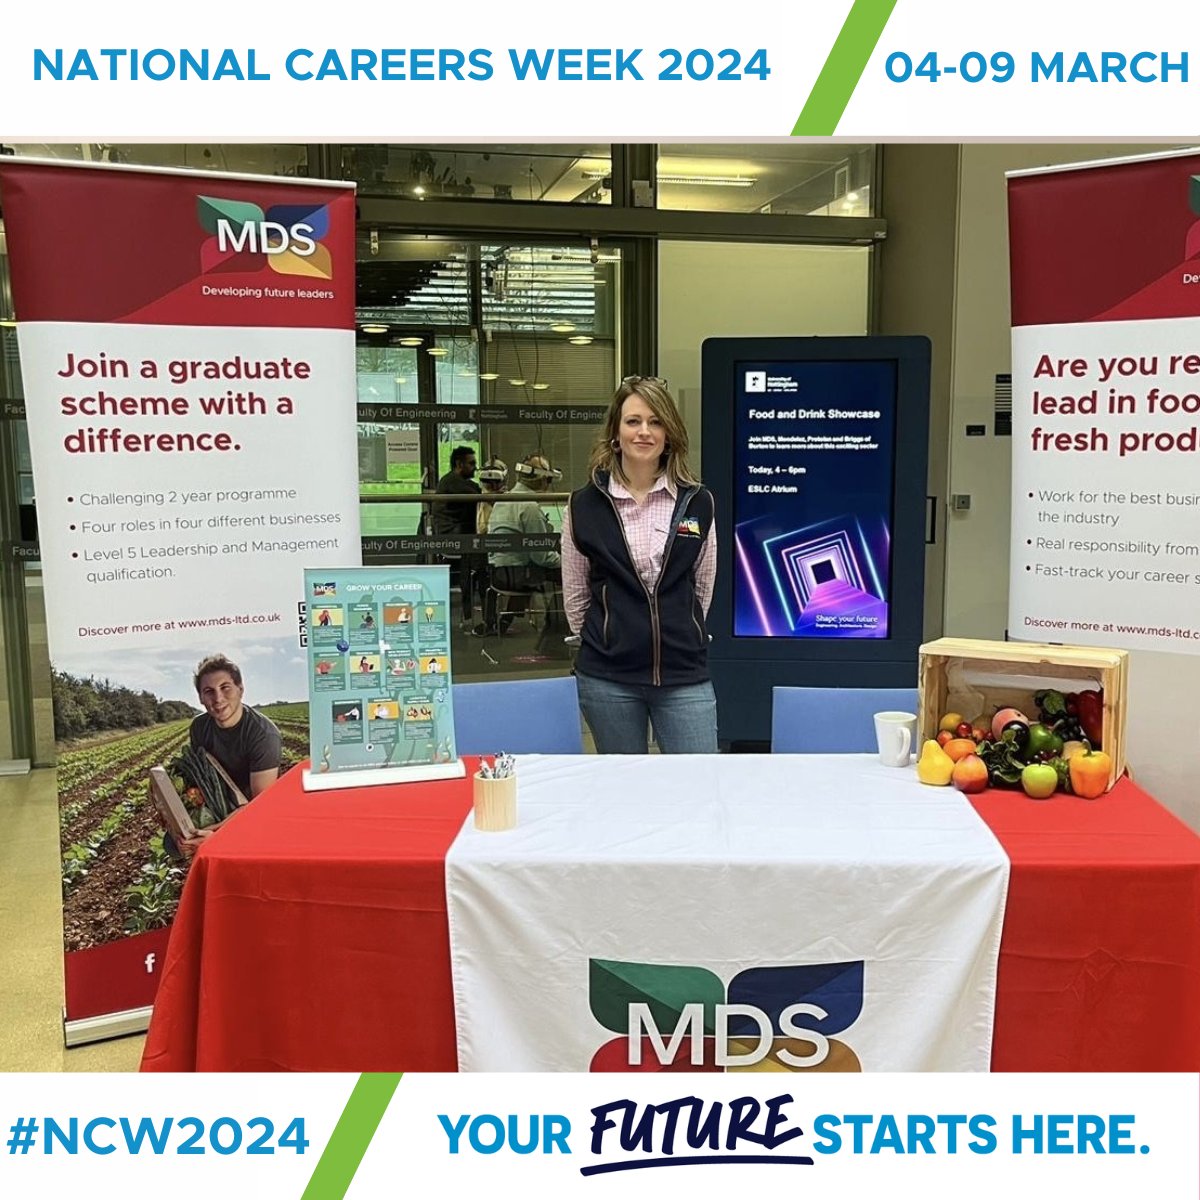 Thank you to all those who visited our stand at @uniofnottingham careers fair yesterday! Next week we’re heading to @sheffhallamuni - so if you want to get ahead and kickstart your career, reach out or come and find us on Thursday the 14th! Your future starts with MDS #NCW2024